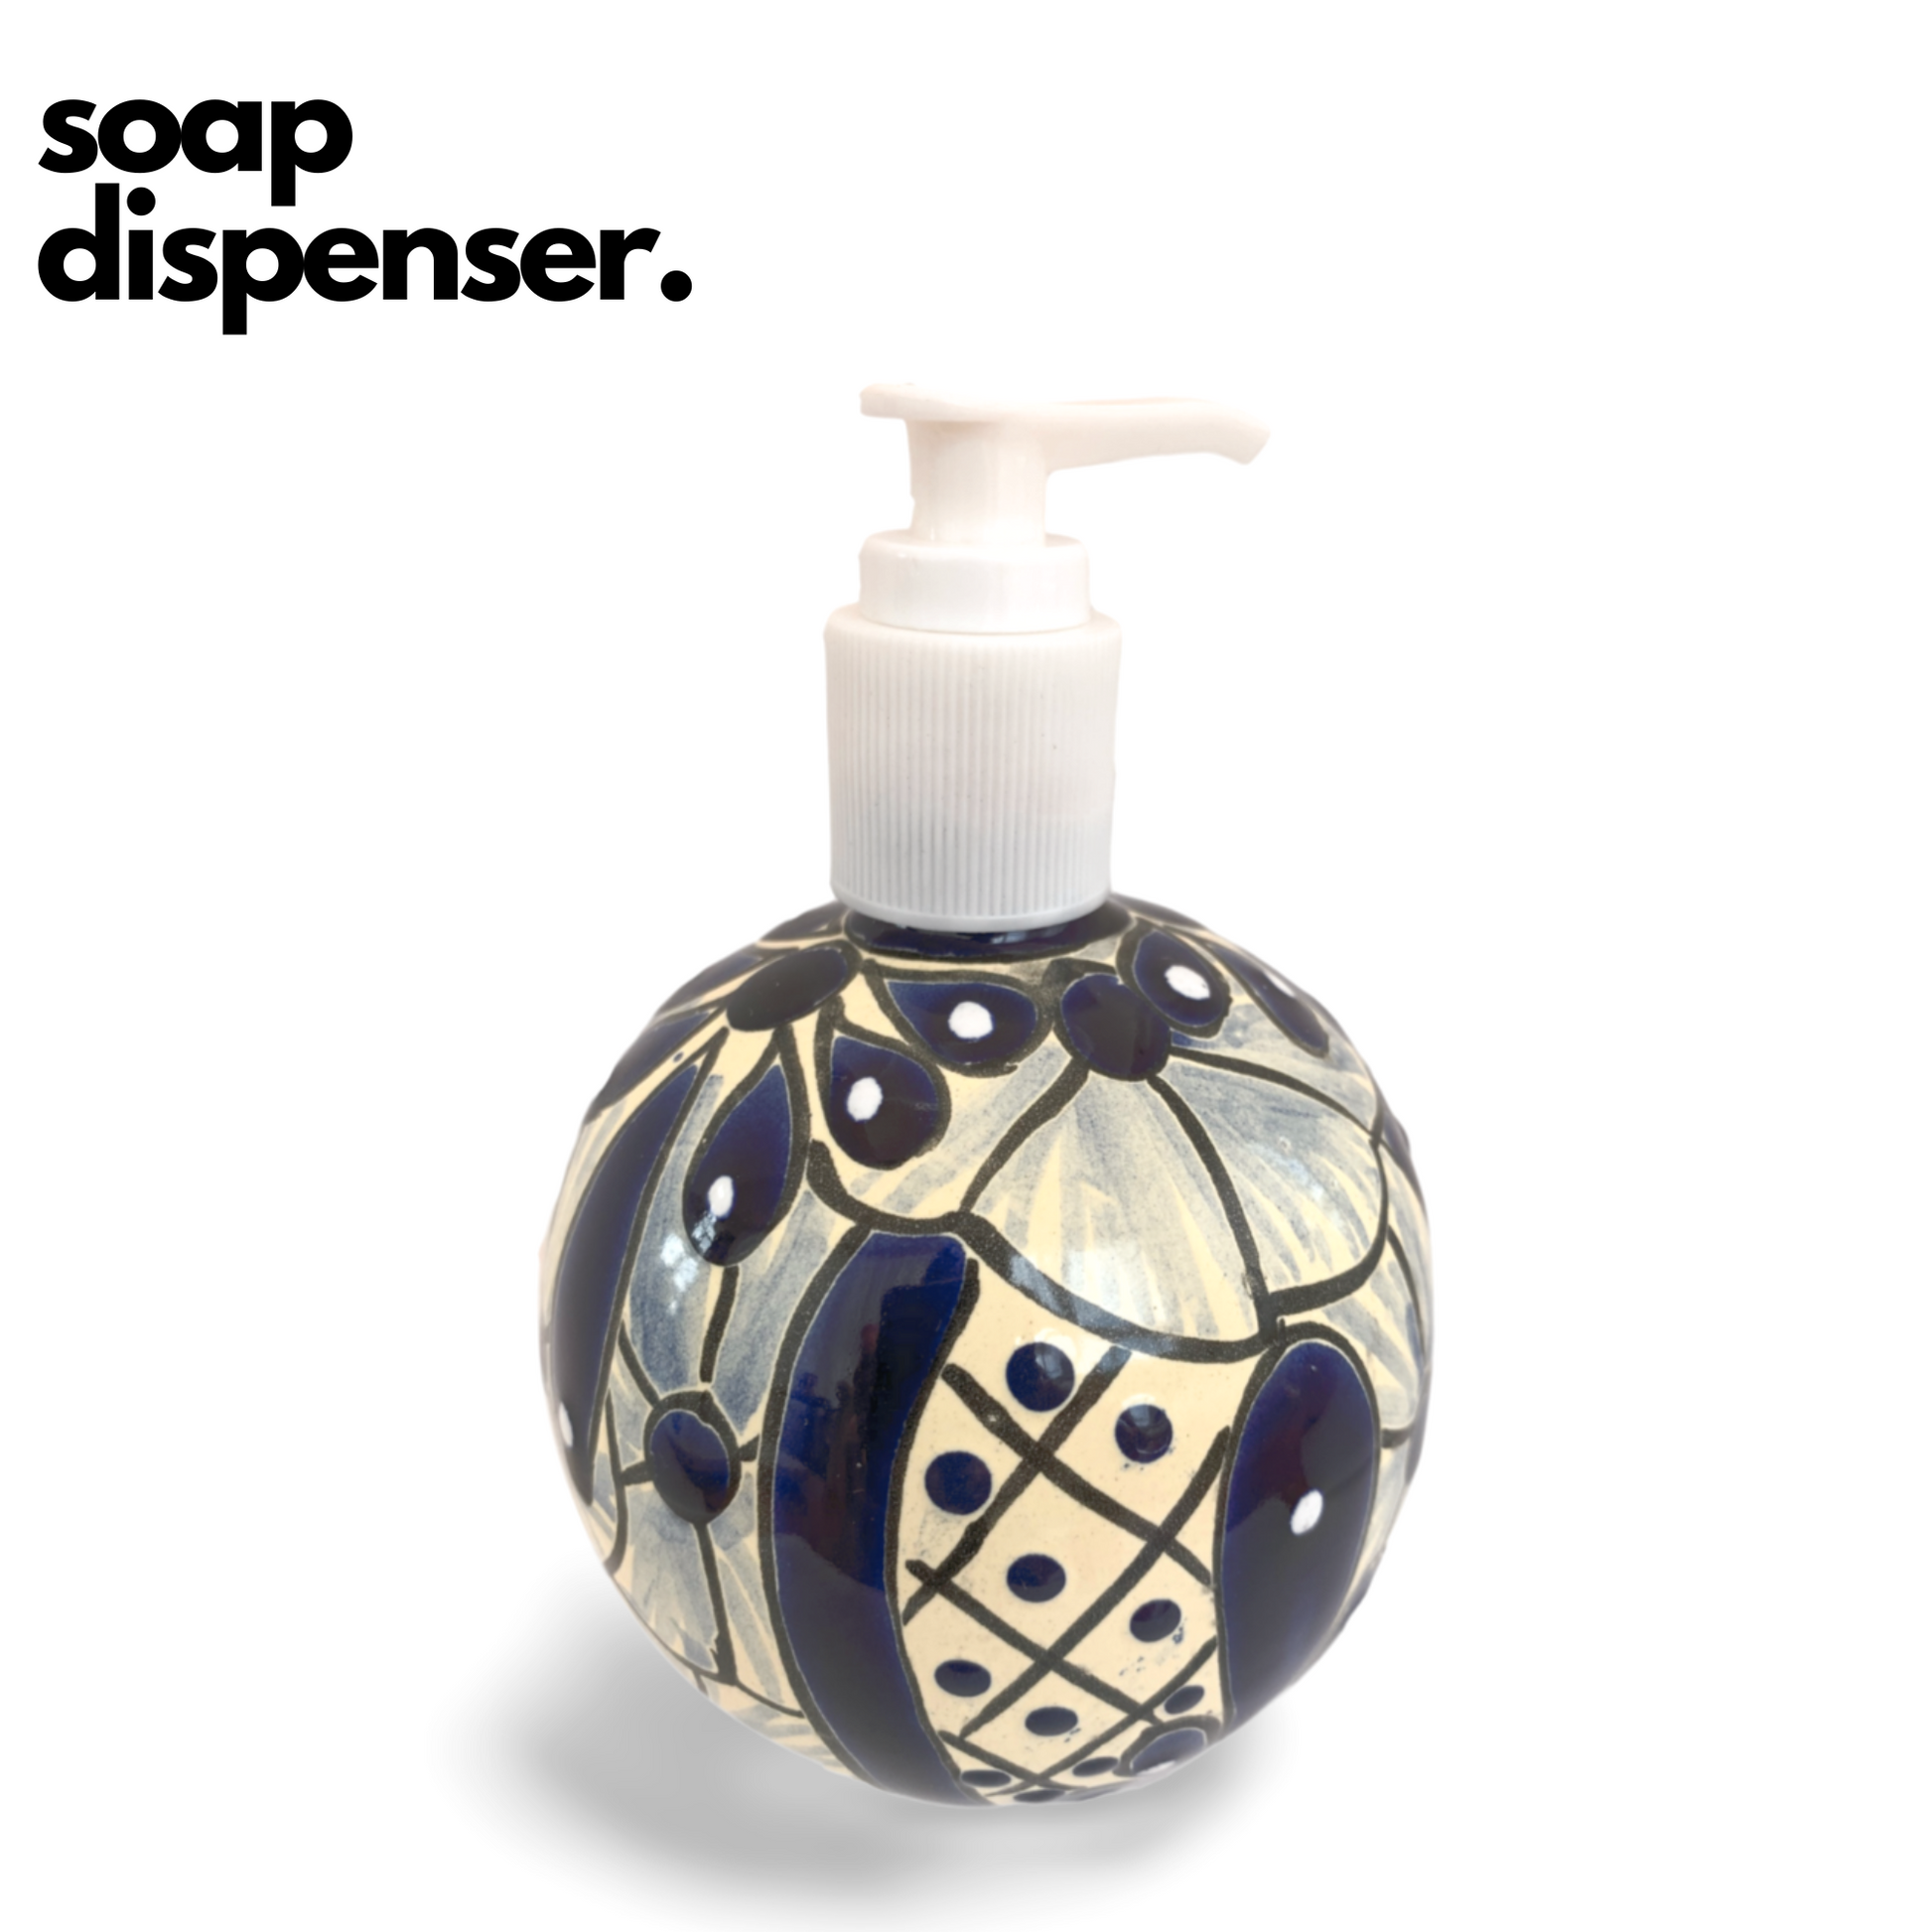 A spherical soap dispenser, hand-painted in blue and white Talavera design, adding a vibrant touch to any kitchen or bathroom.